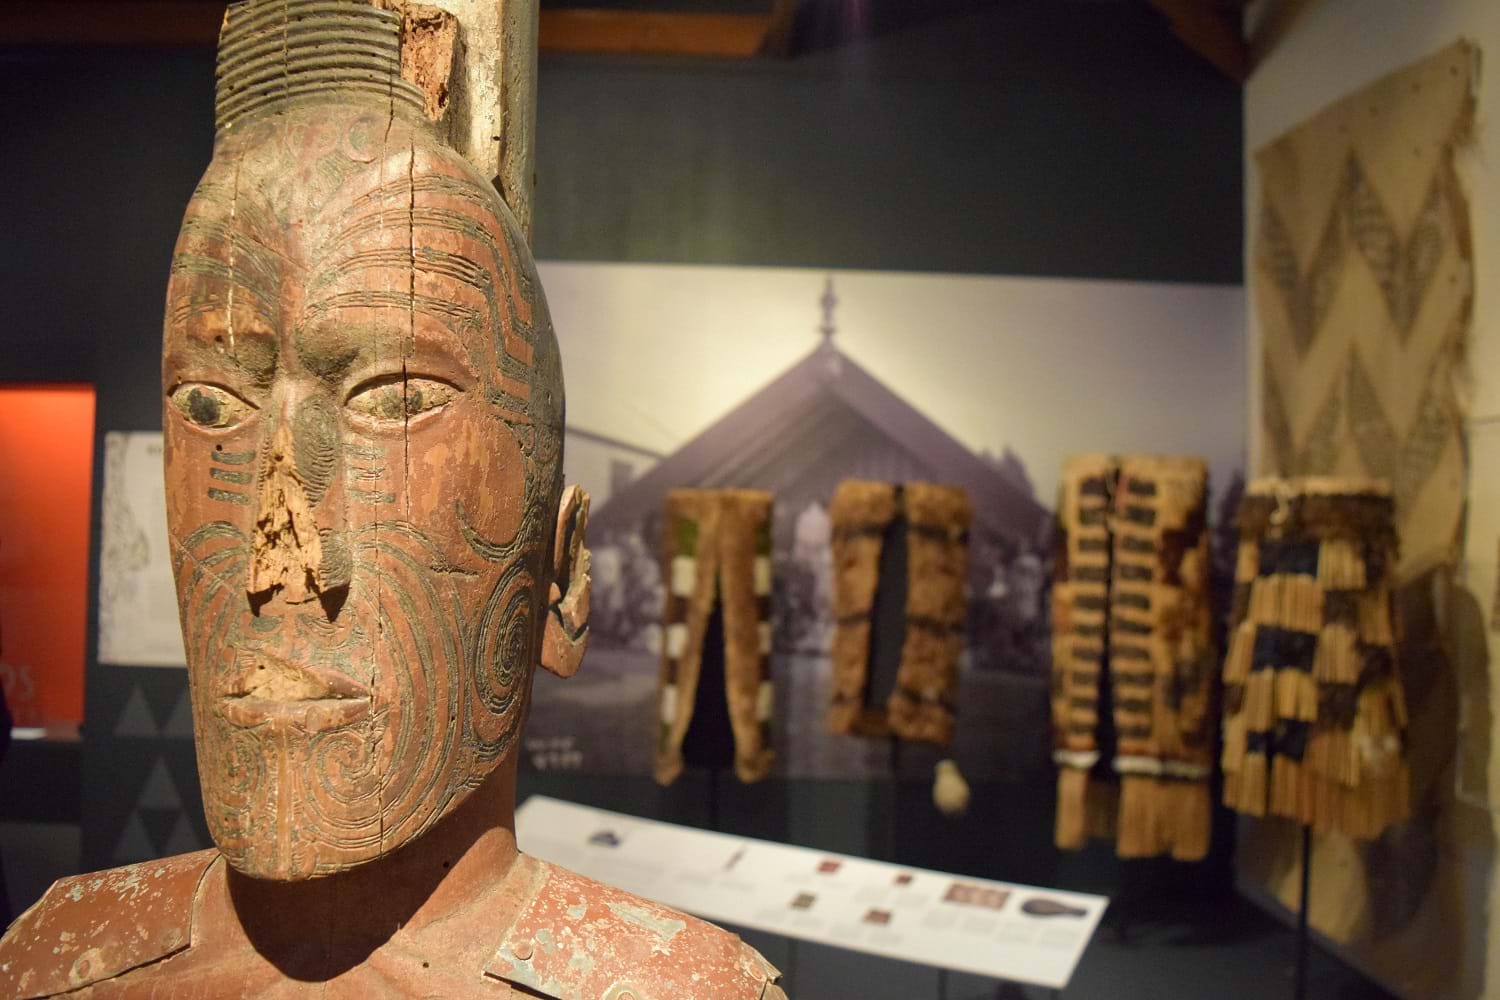 local art and culture at tairawhiti museum and art gallery in gisborne